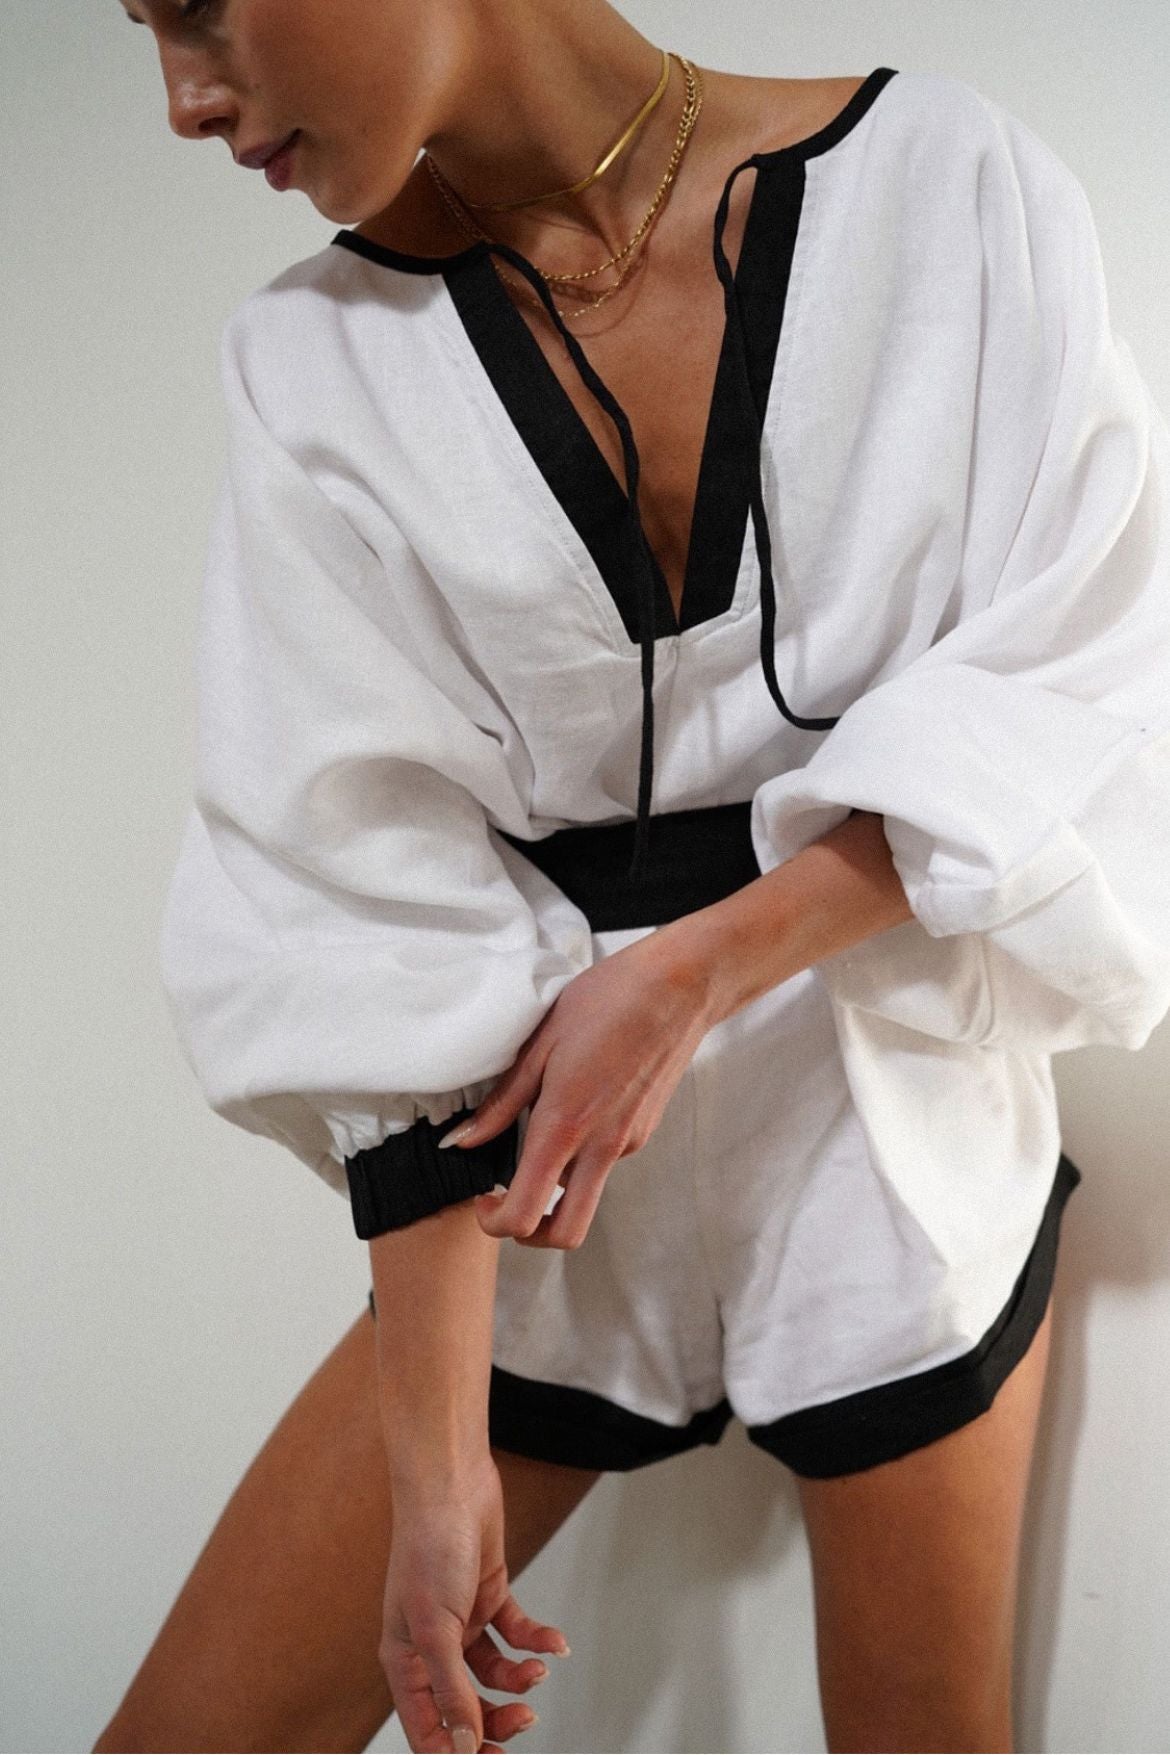 The Ease Label - Keros Romper - Linen batwing romper in white and black